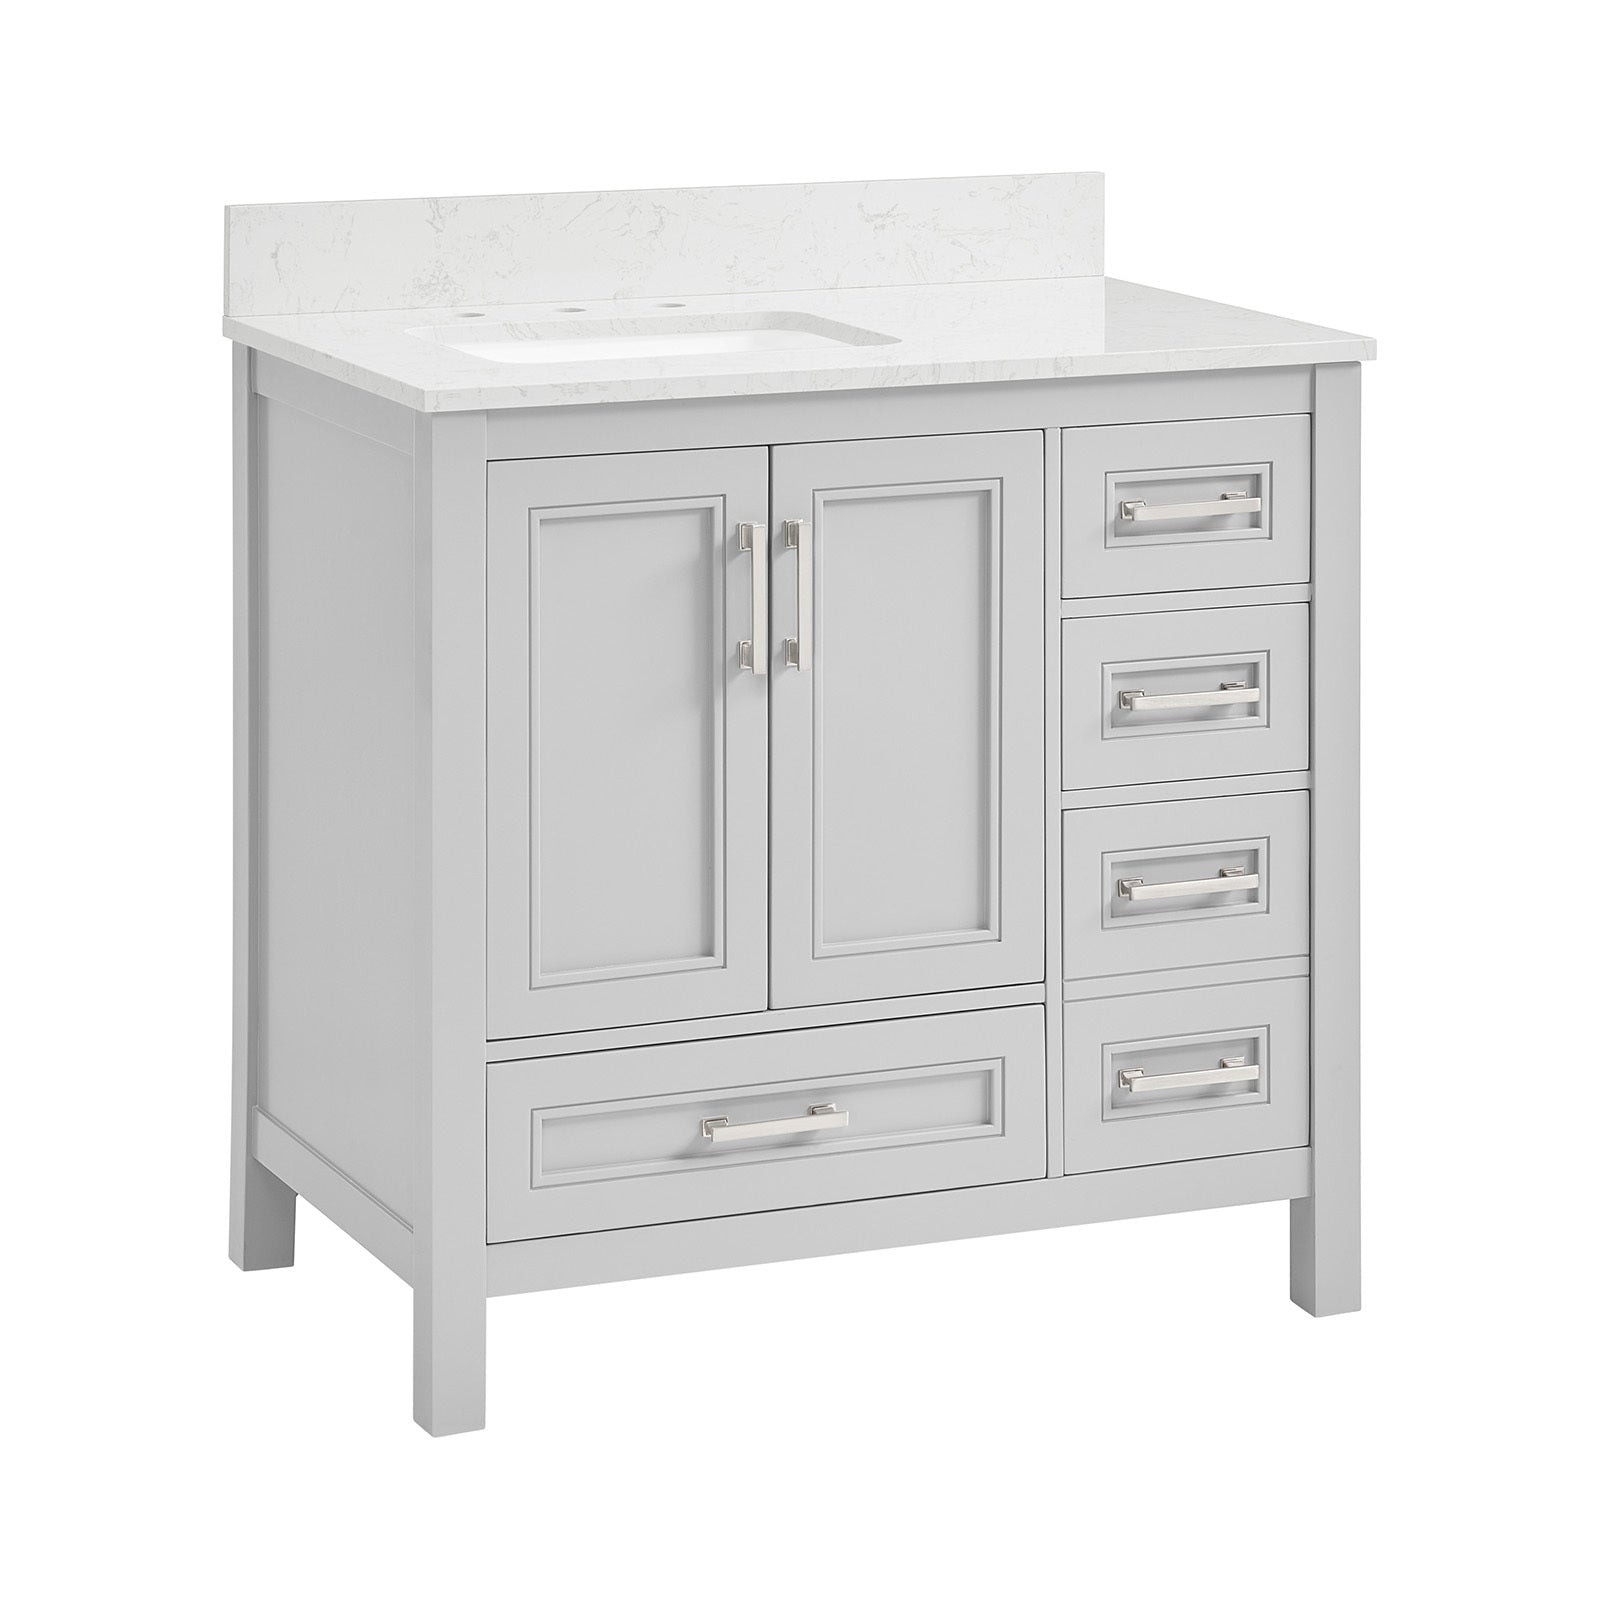 36 in Undermount Single Sink Bathroom Storage Cabinet light gray-2-4-36 to 47 in-36 to 59 in-soft close